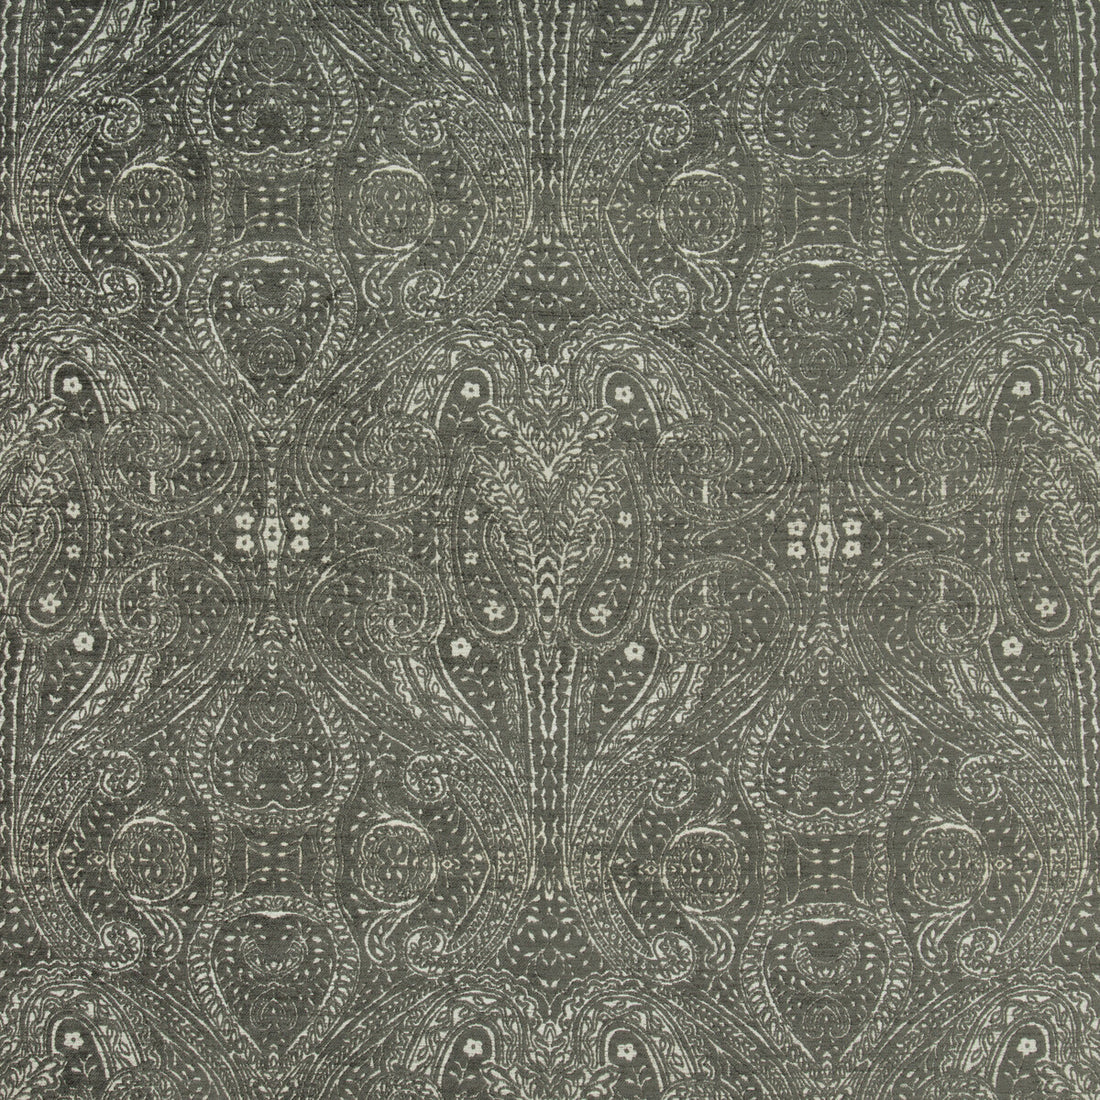 Kravet Design fabric in 35007-21 color - pattern 35007.21.0 - by Kravet Design in the Performance Crypton Home collection